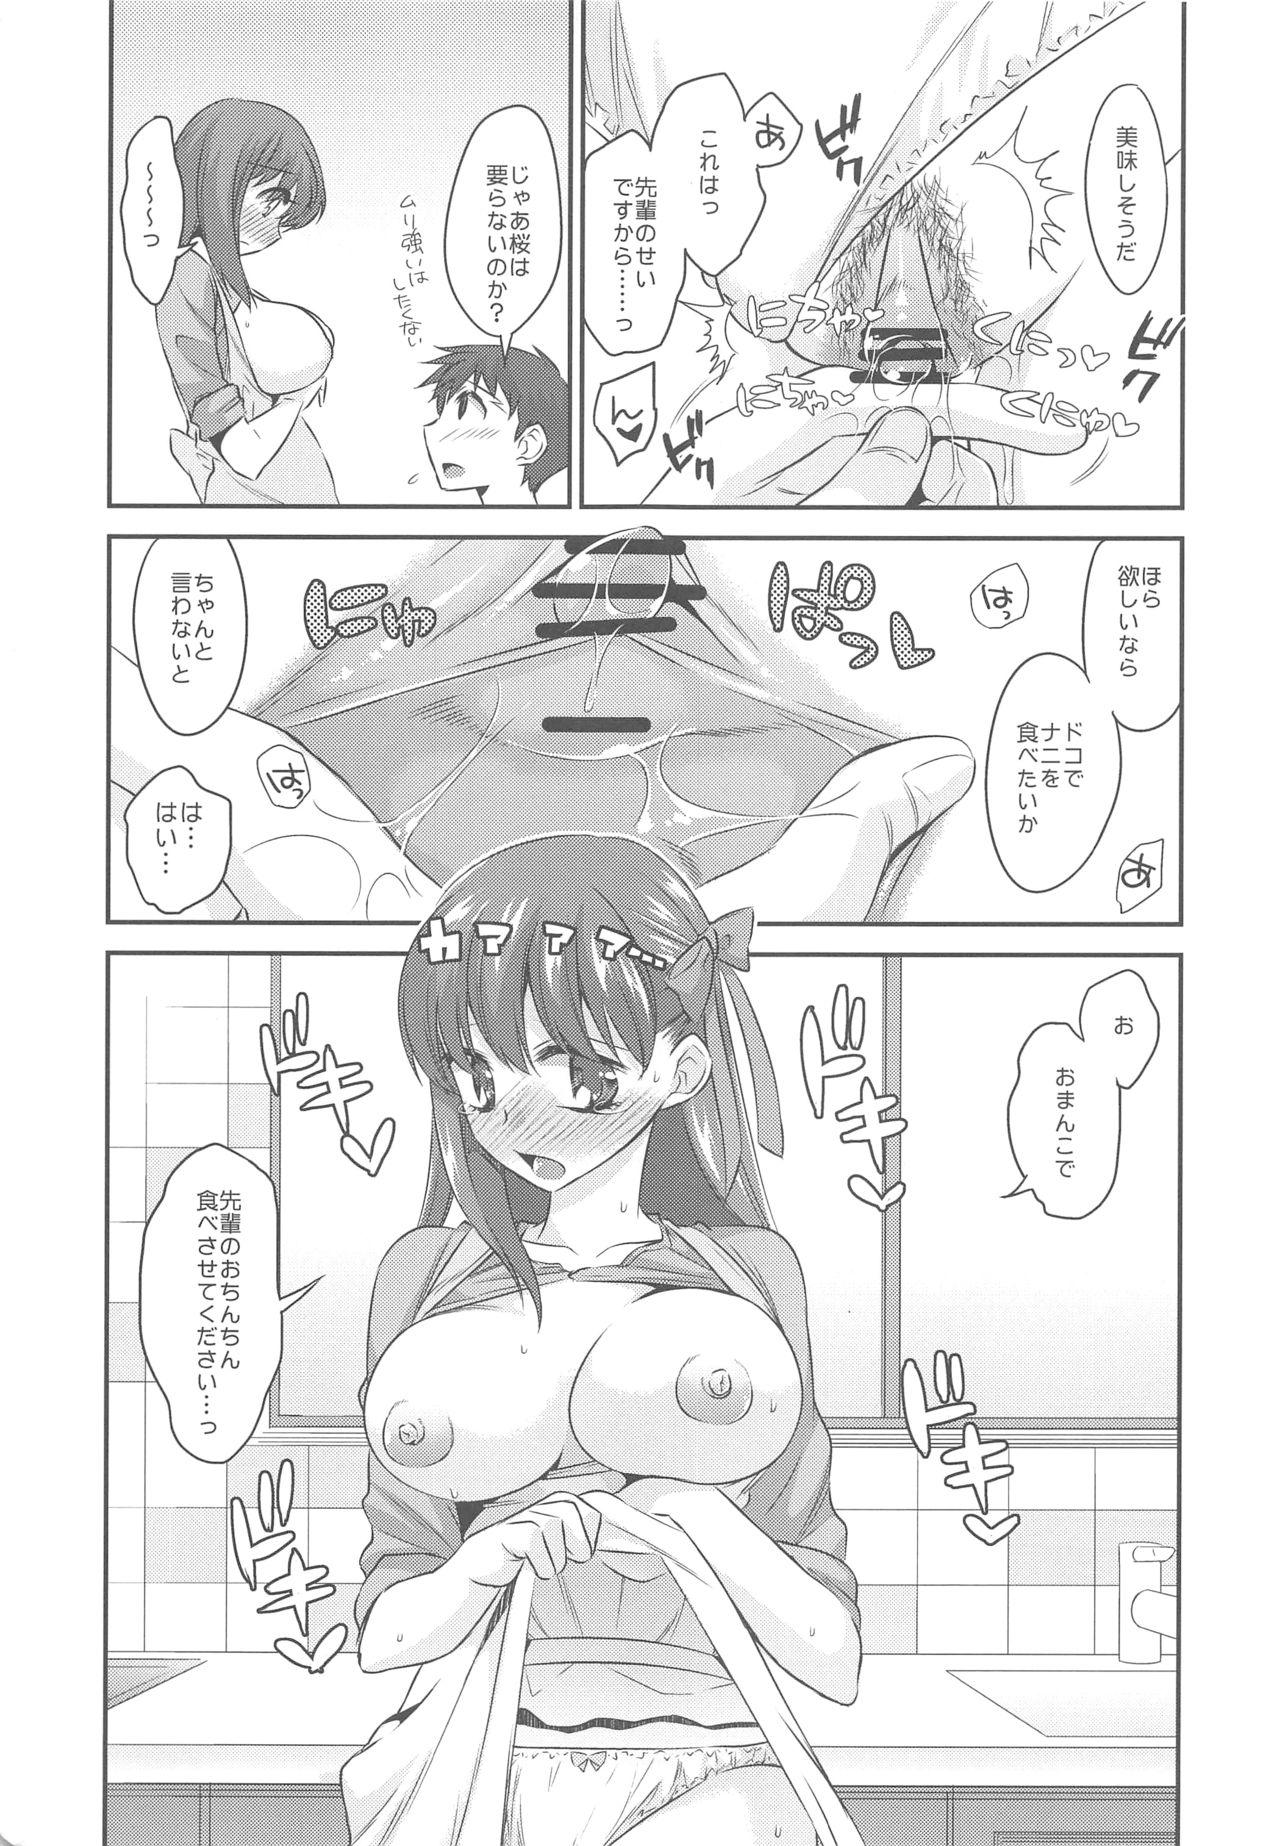 Passion Kitchen H - Fate stay night Barely 18 Porn - Page 11